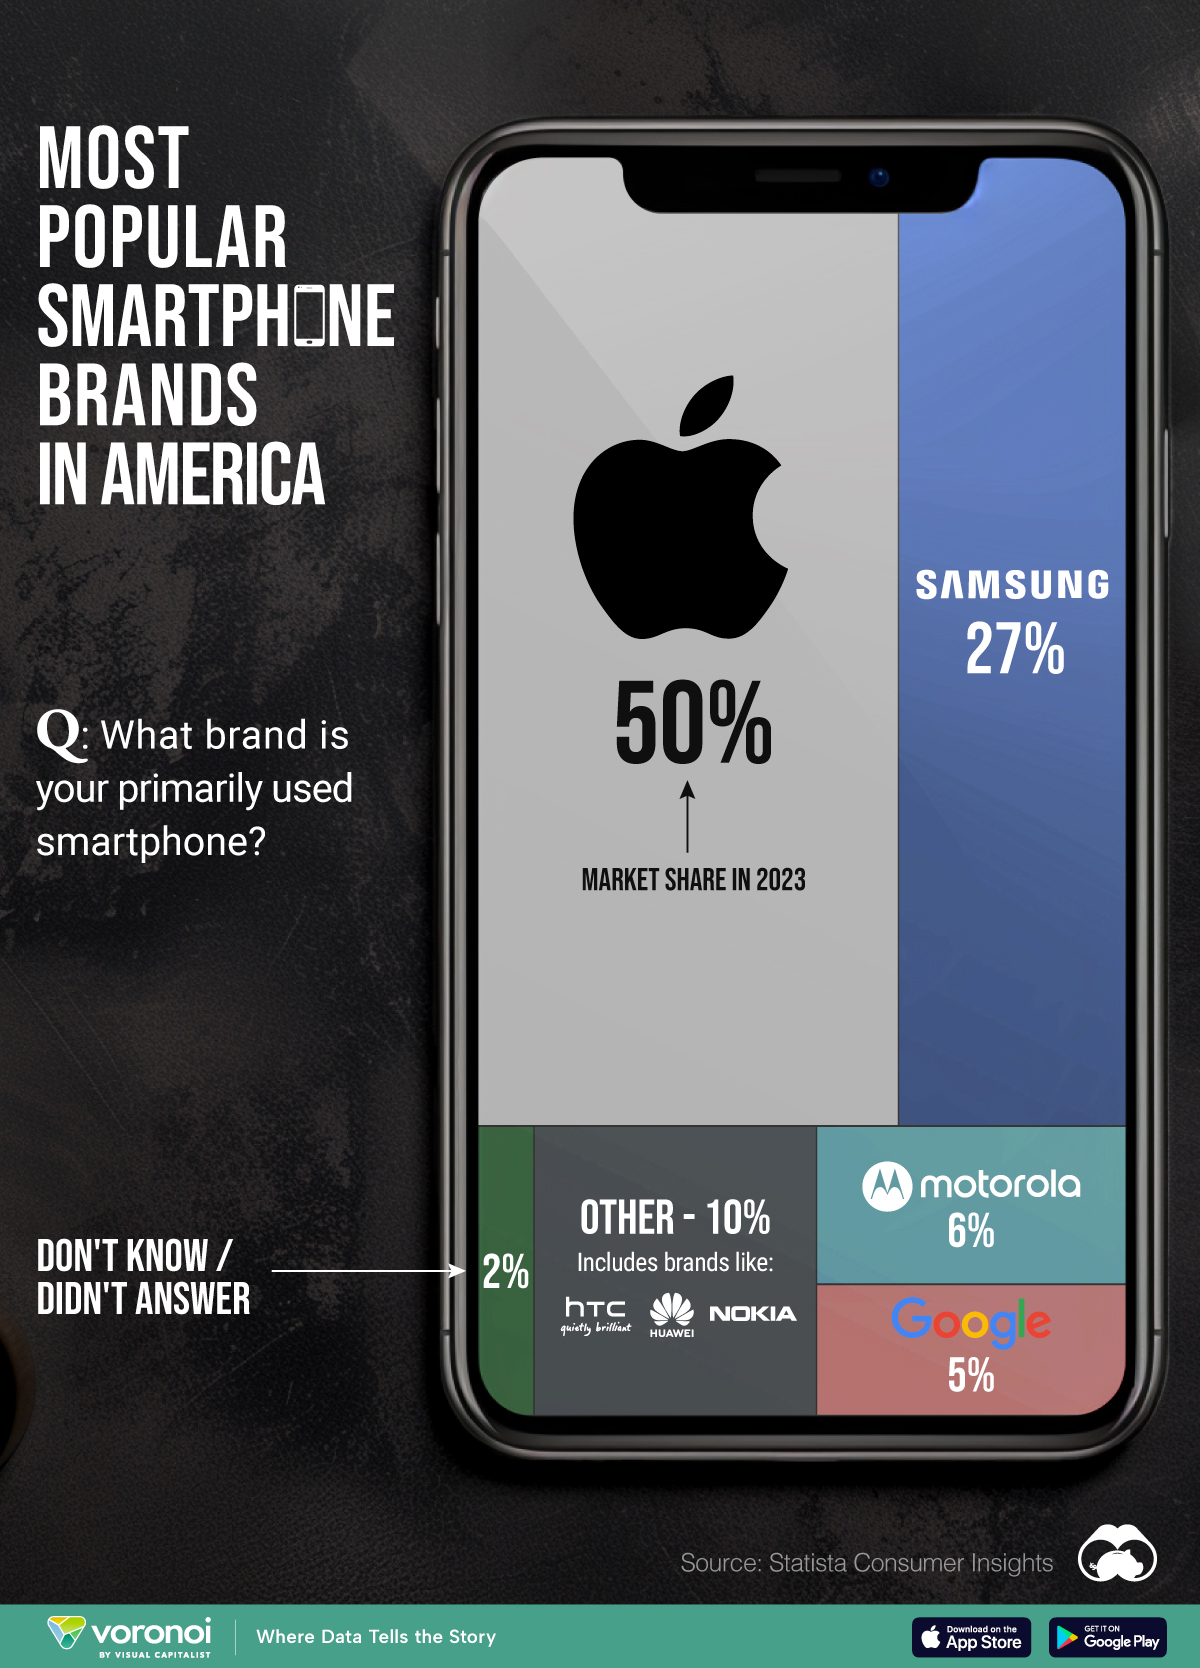 A chart listing the popularity of smartphones brands in America, ranked by market share.